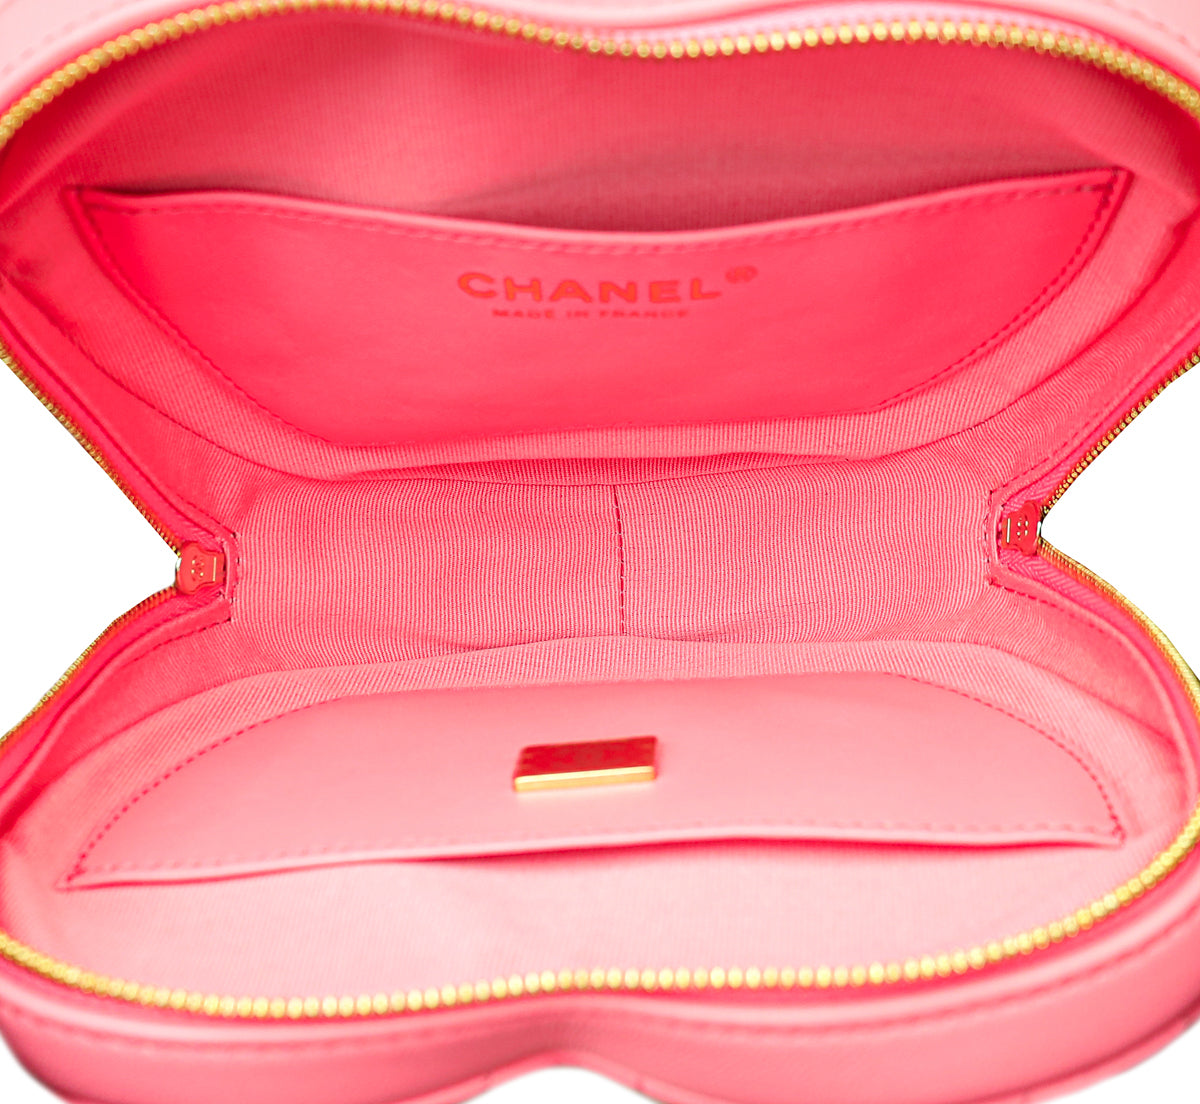 Chanel Pink CC In Love Heart Bag